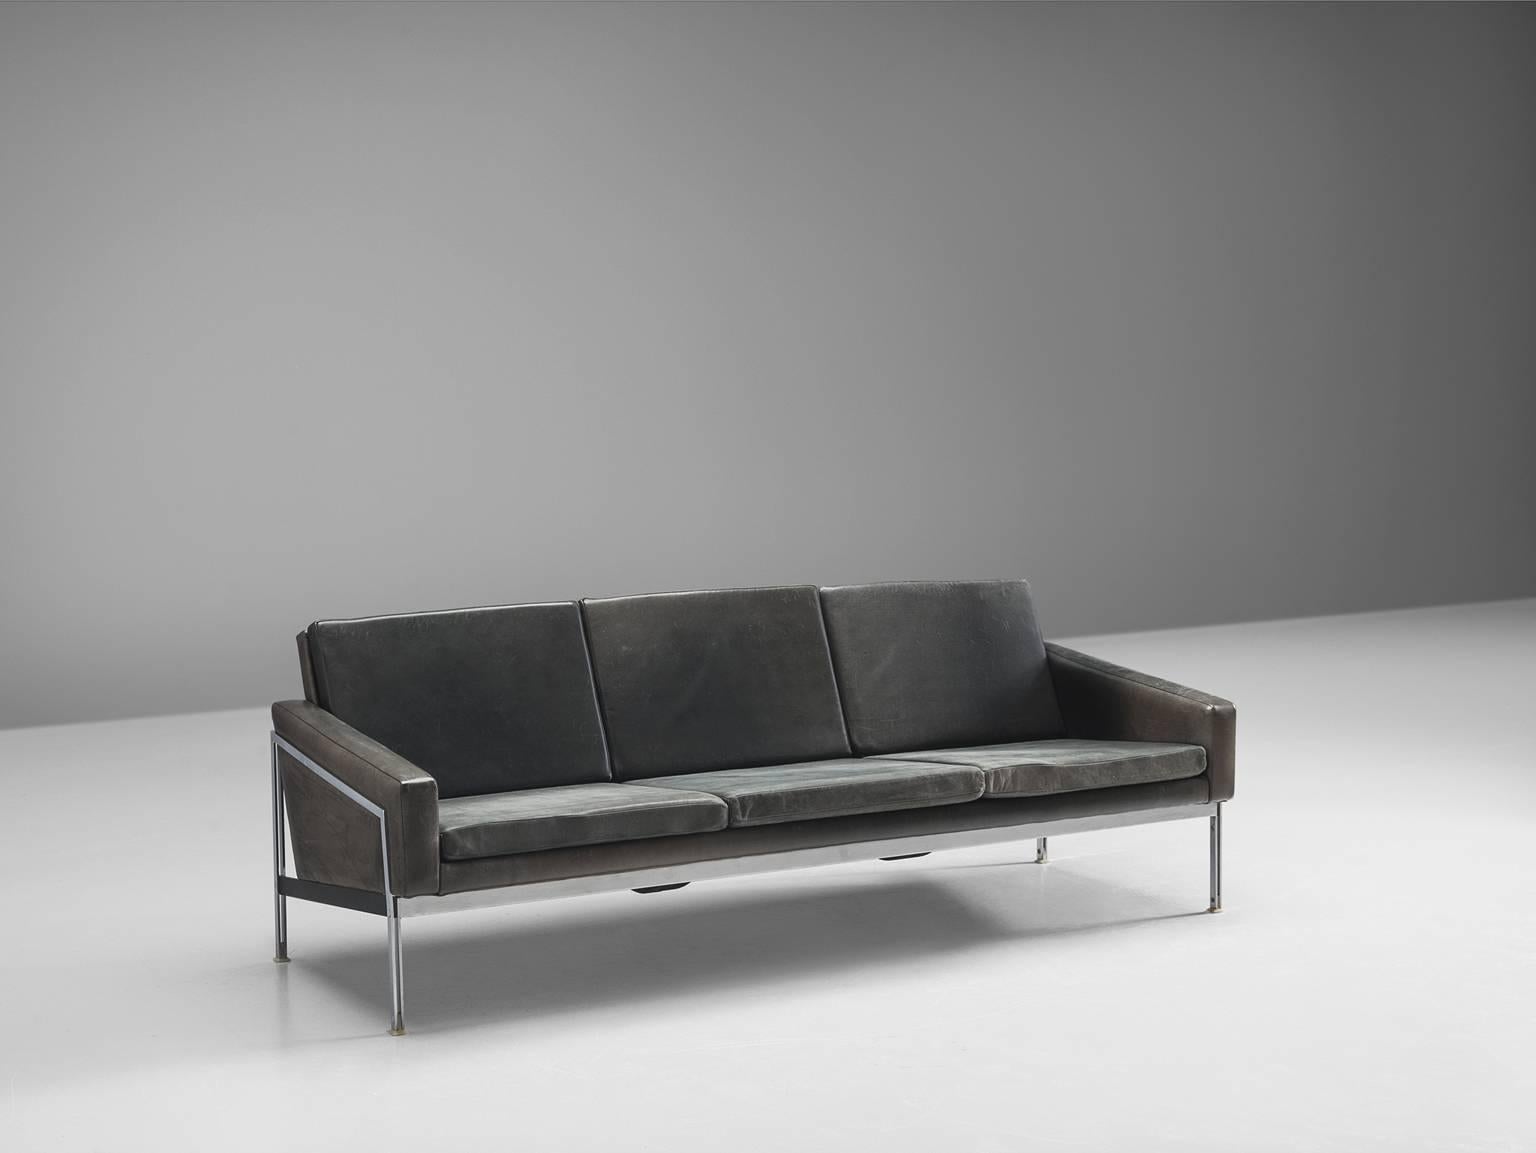 Sofa, three-seat, black leather, steel, Germany, 1950s

This clean and well-constructed three-seat sofa is German in both its aesthetics and construction. This means that is clean, unobstructed and solid. The leather is in great patinated